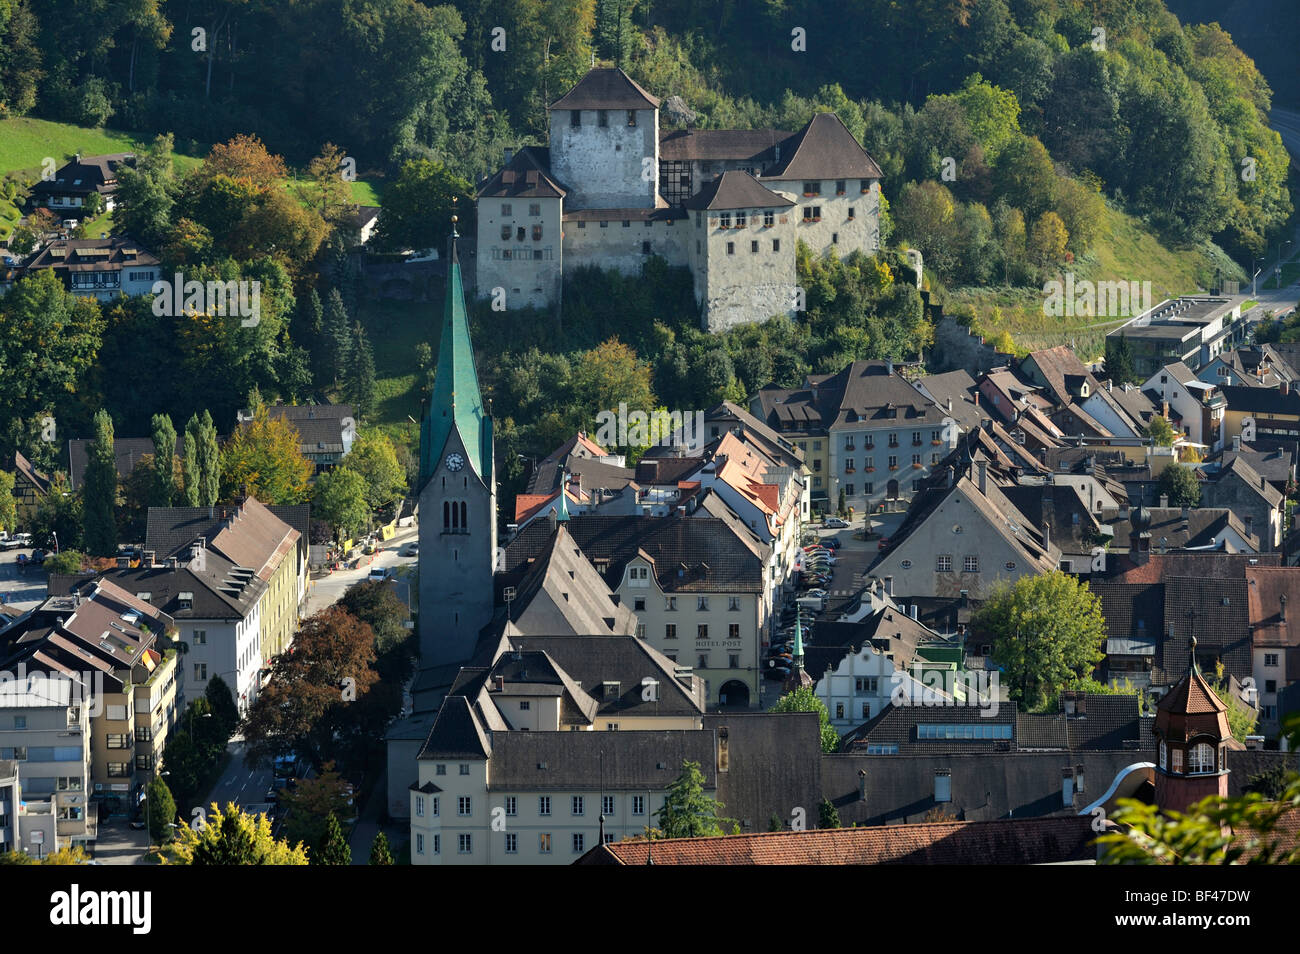 Downtown Feldkirch with its Castle Schattenburg and Church, Austria AT Stock Photo